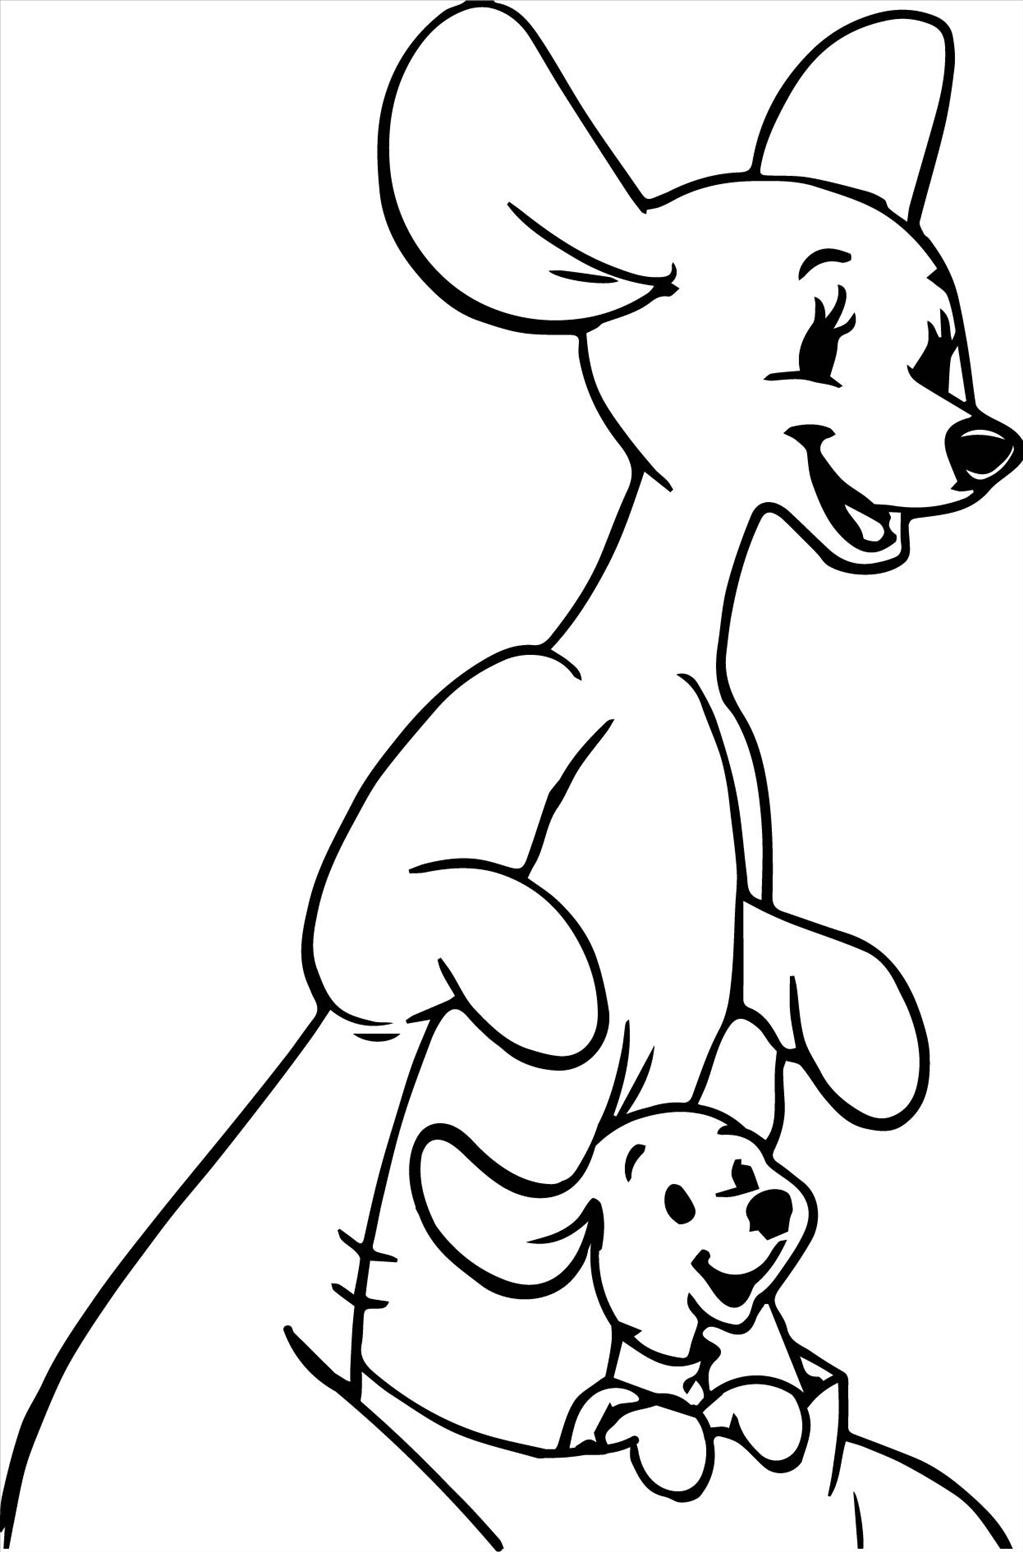 Kangaroo Coloring Pages For Kids At GetColorings Free Printable Colorings Pages To Print